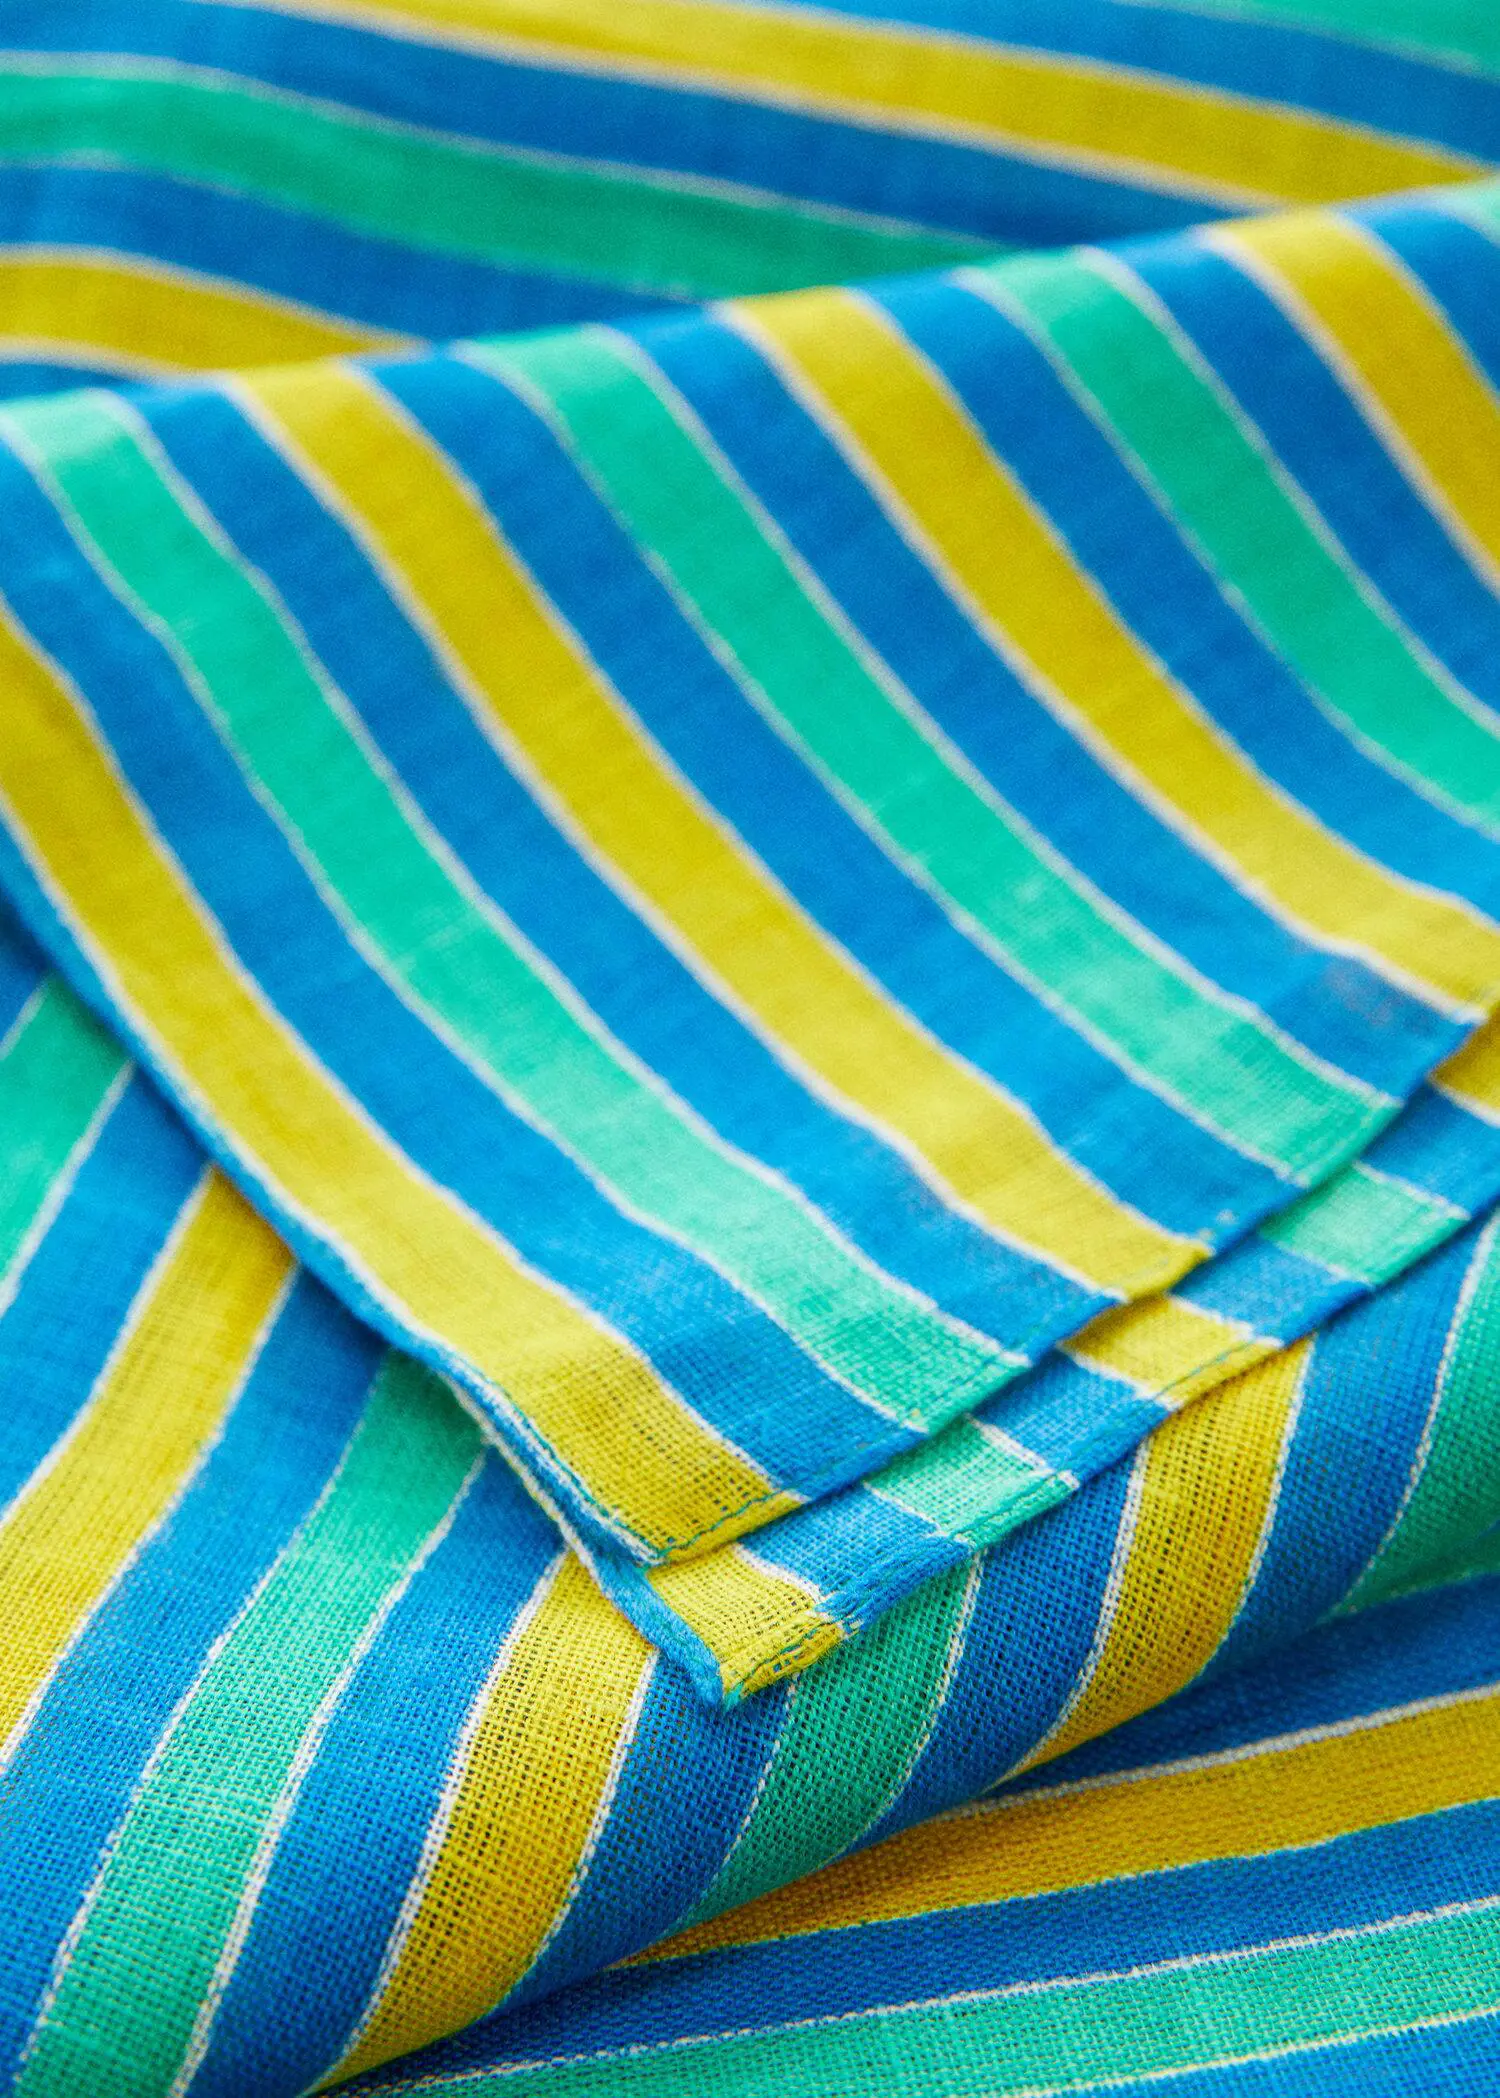 Mango Multi-colored striped linen sarong. a close-up view of a blue, yellow, and green striped cloth. 